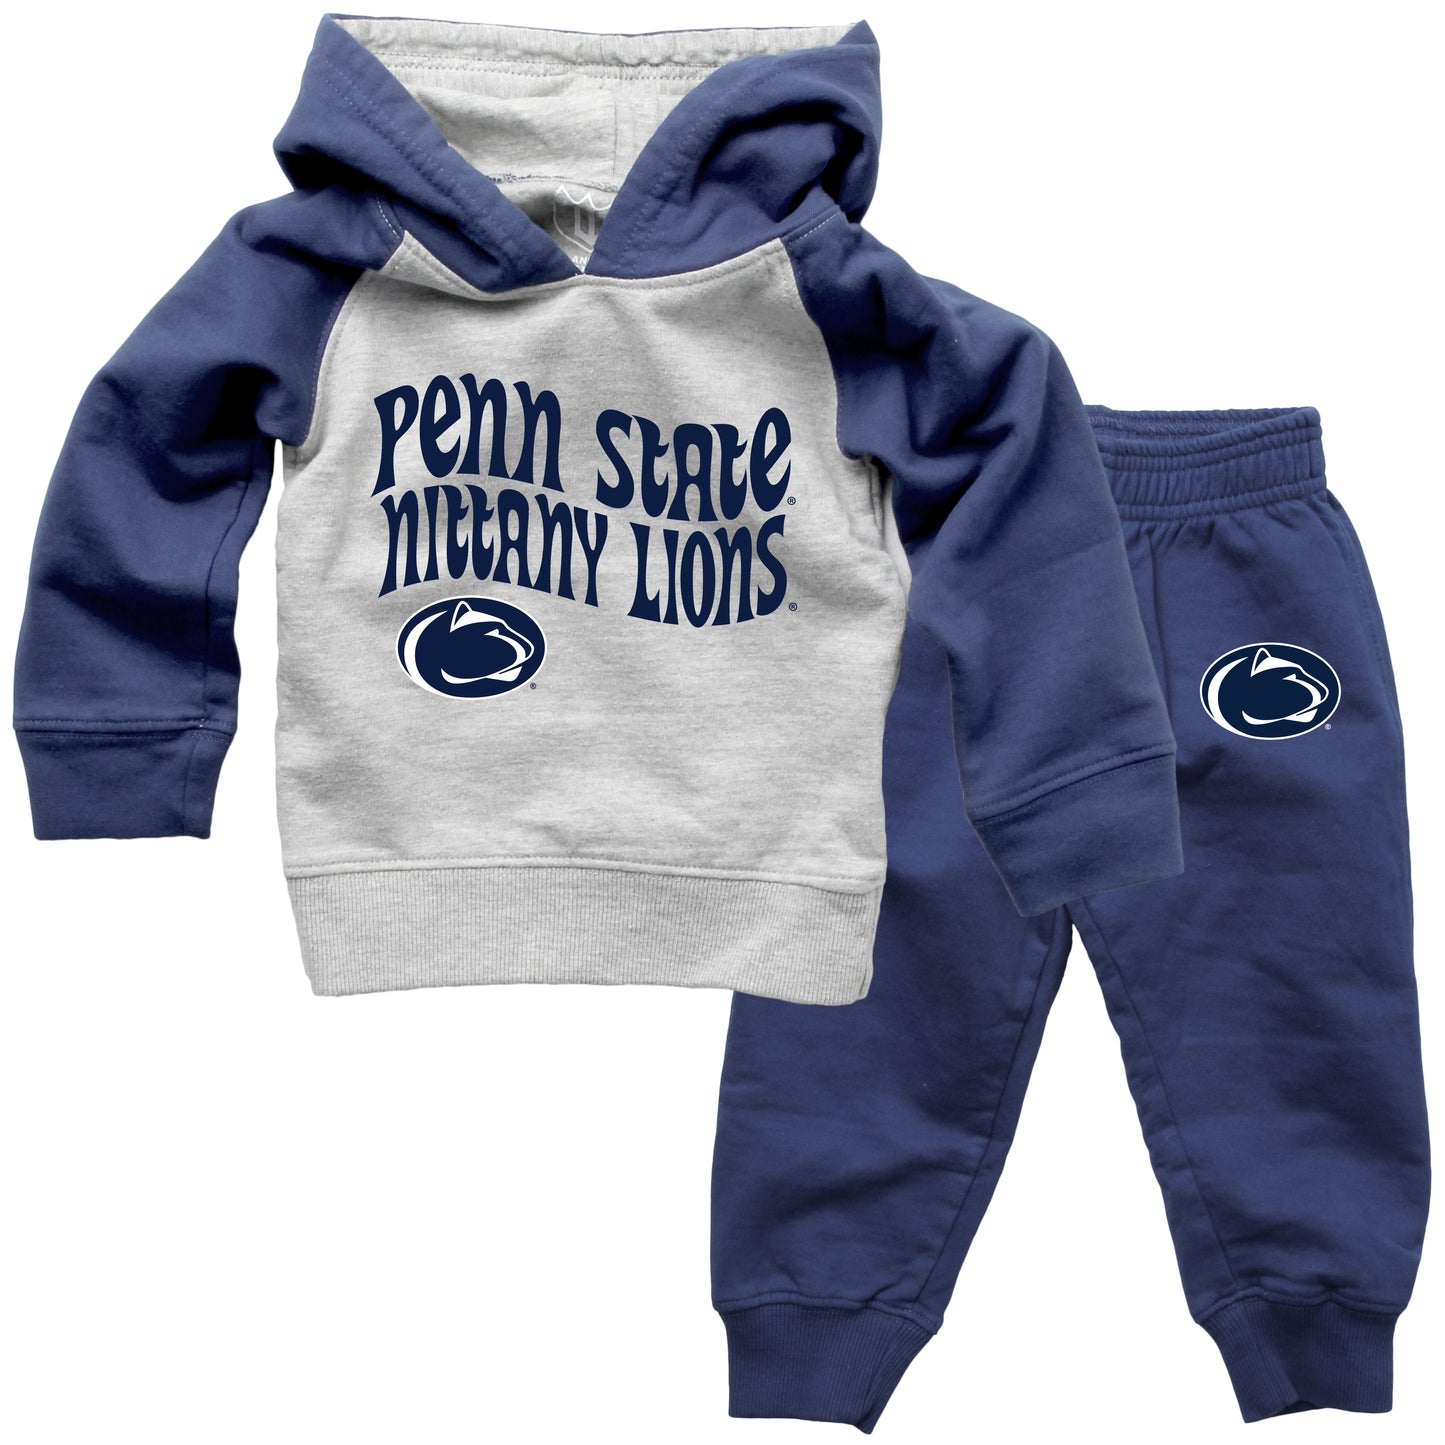 Penn State Nittany Lions Wes and Willy NCAA Infant and Toddler Hoodie Set